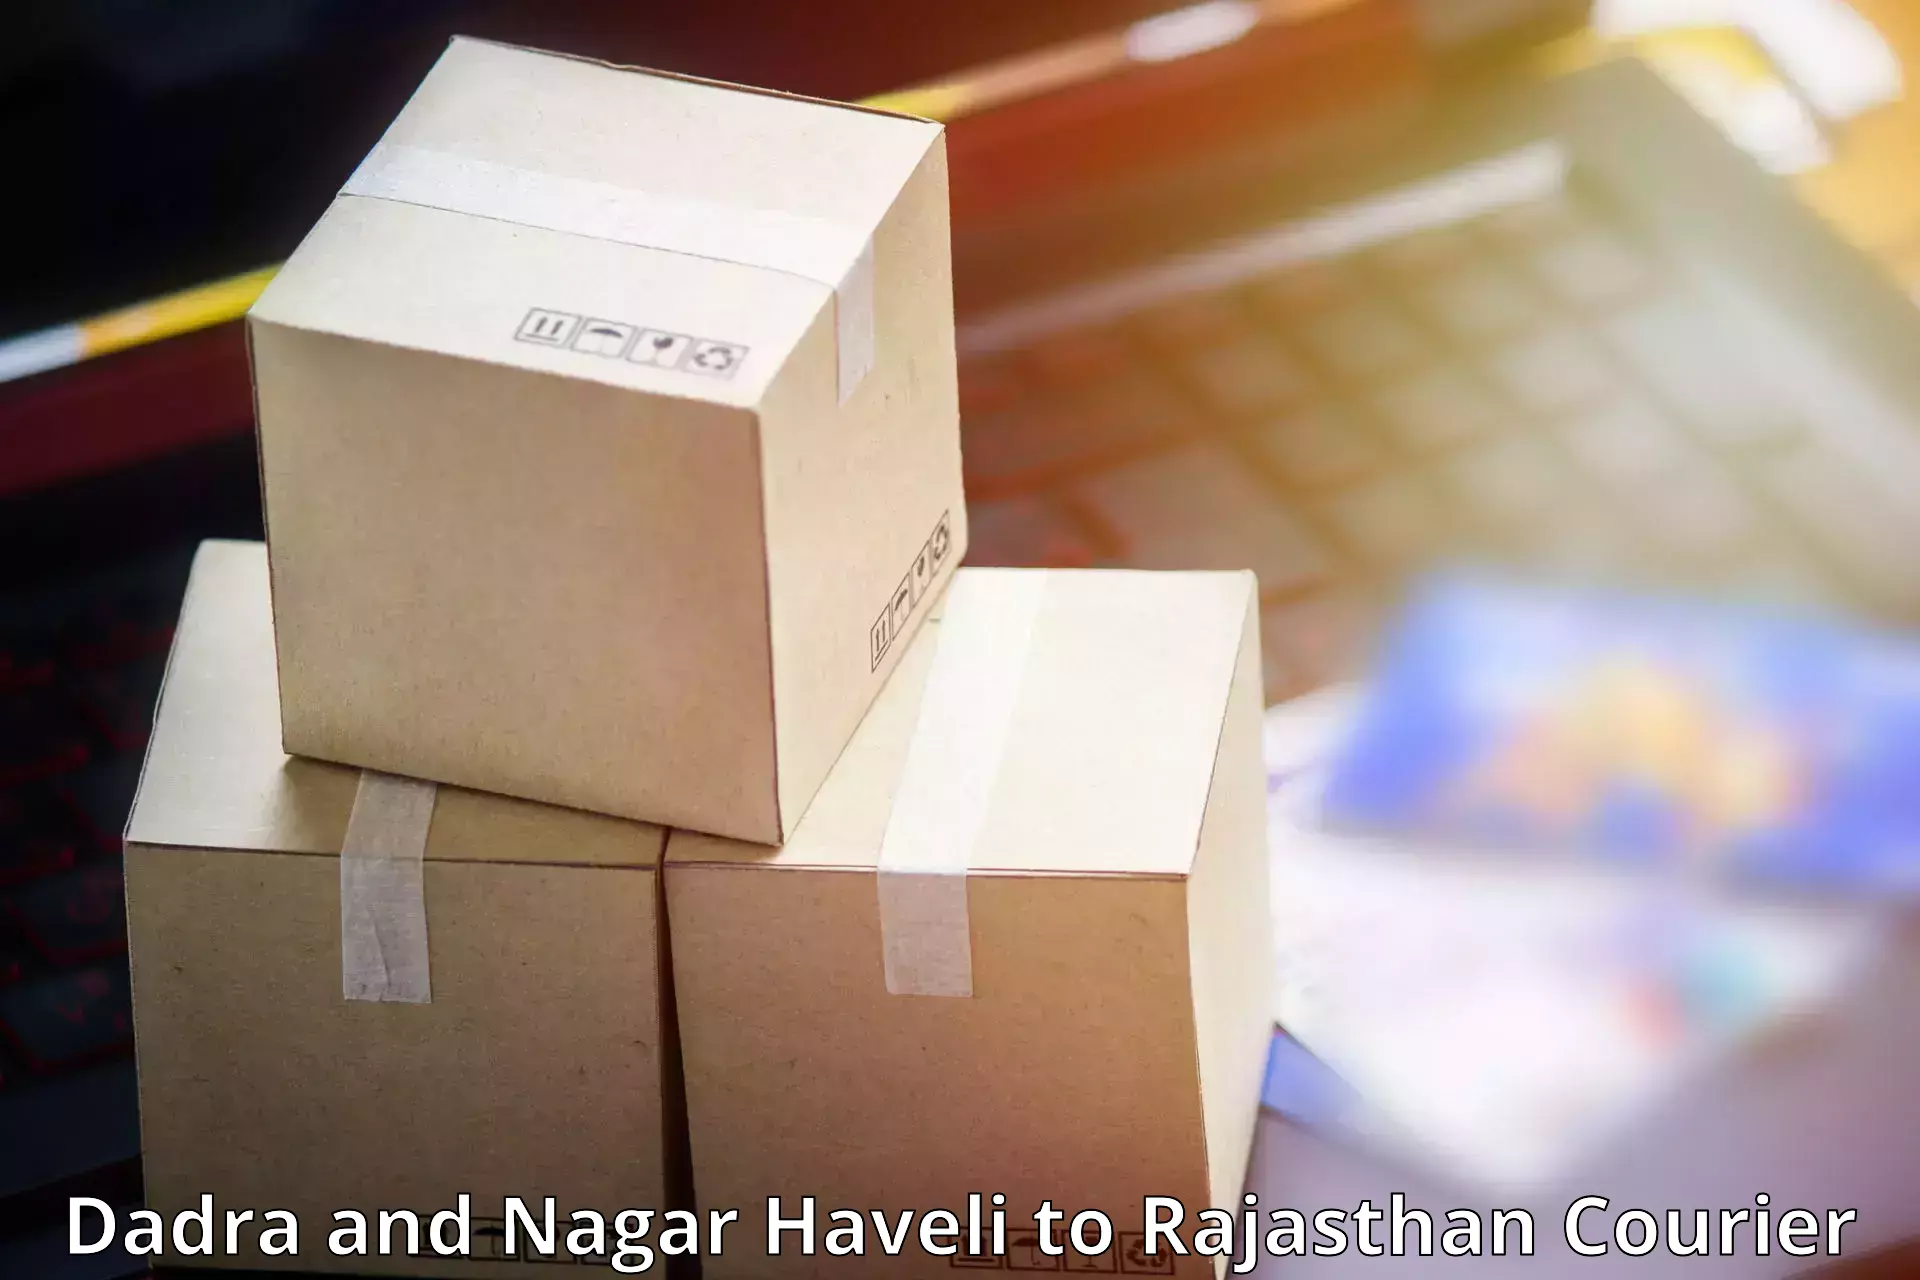 Advanced delivery network Dadra and Nagar Haveli to Dholpur